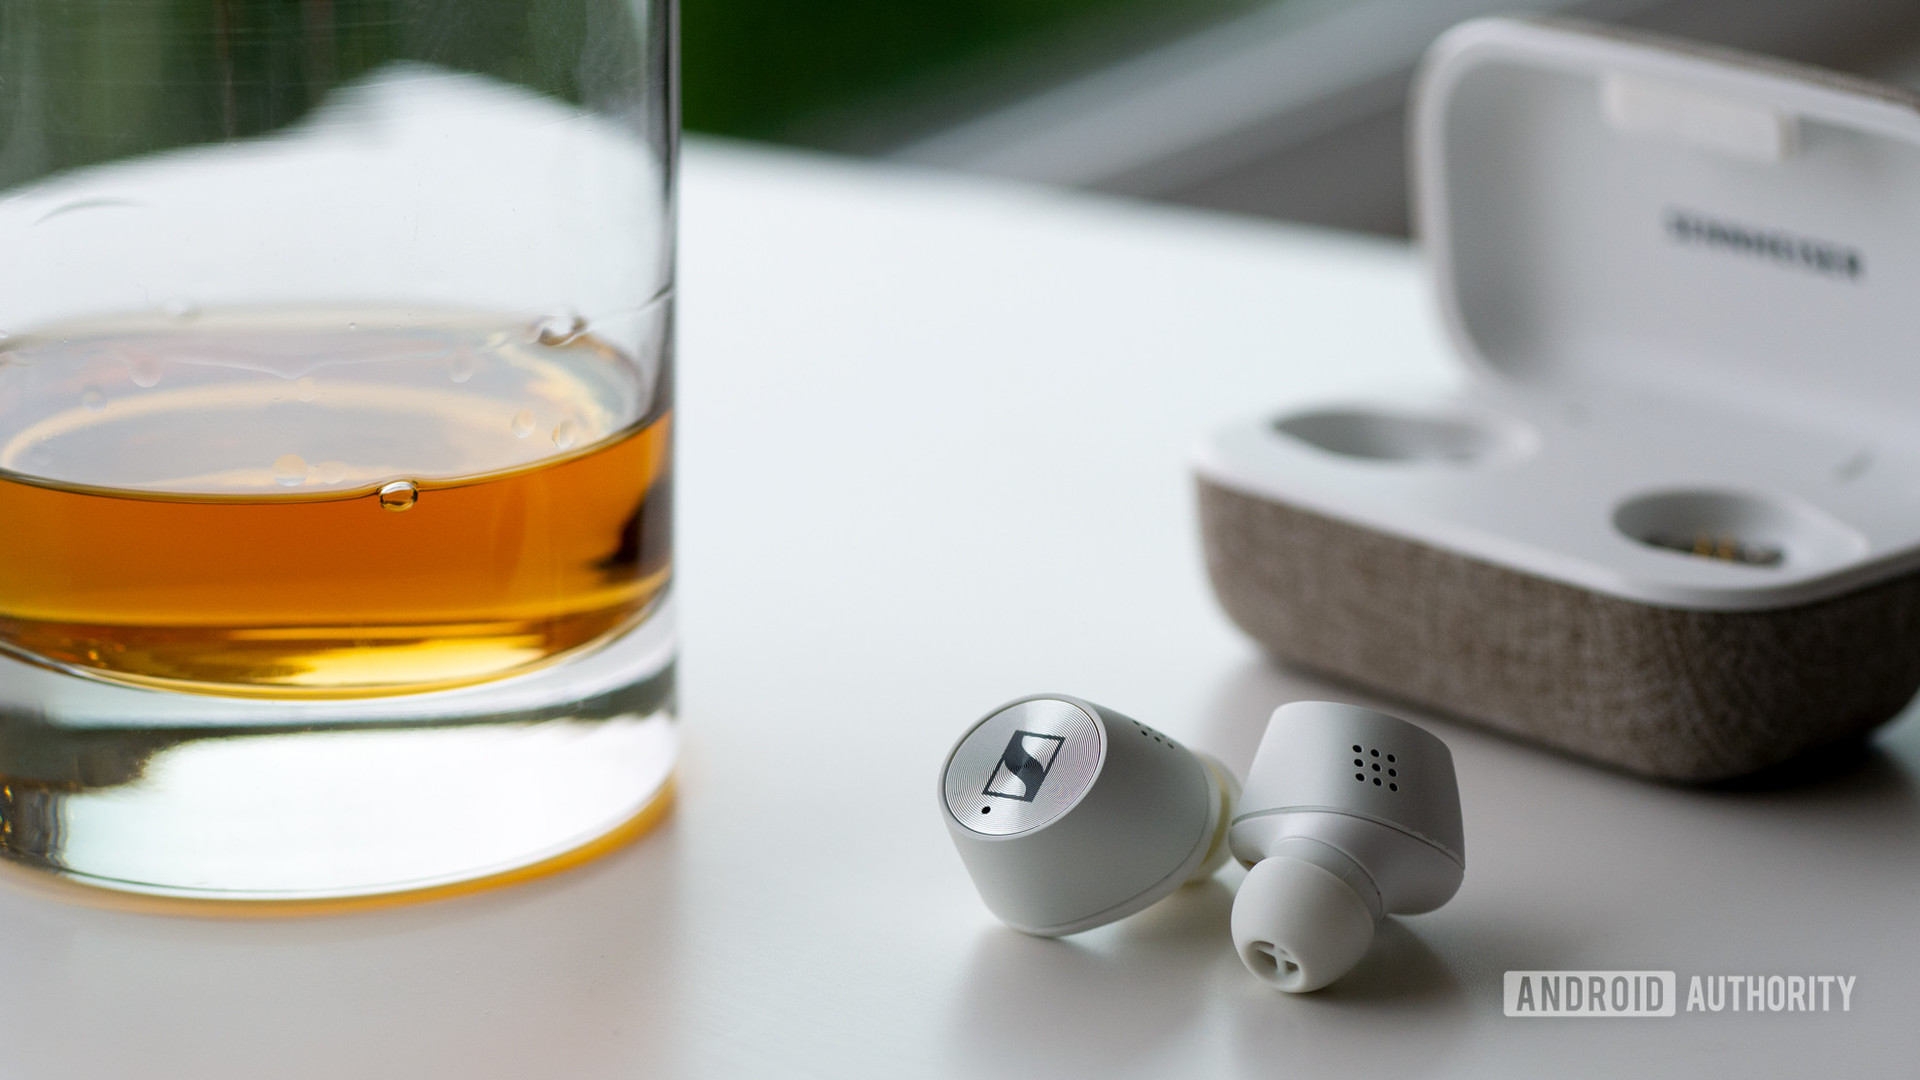 The Sennheiser momentum true wireless 2 noise-cancelling earbuds next to a glass of whiskey.